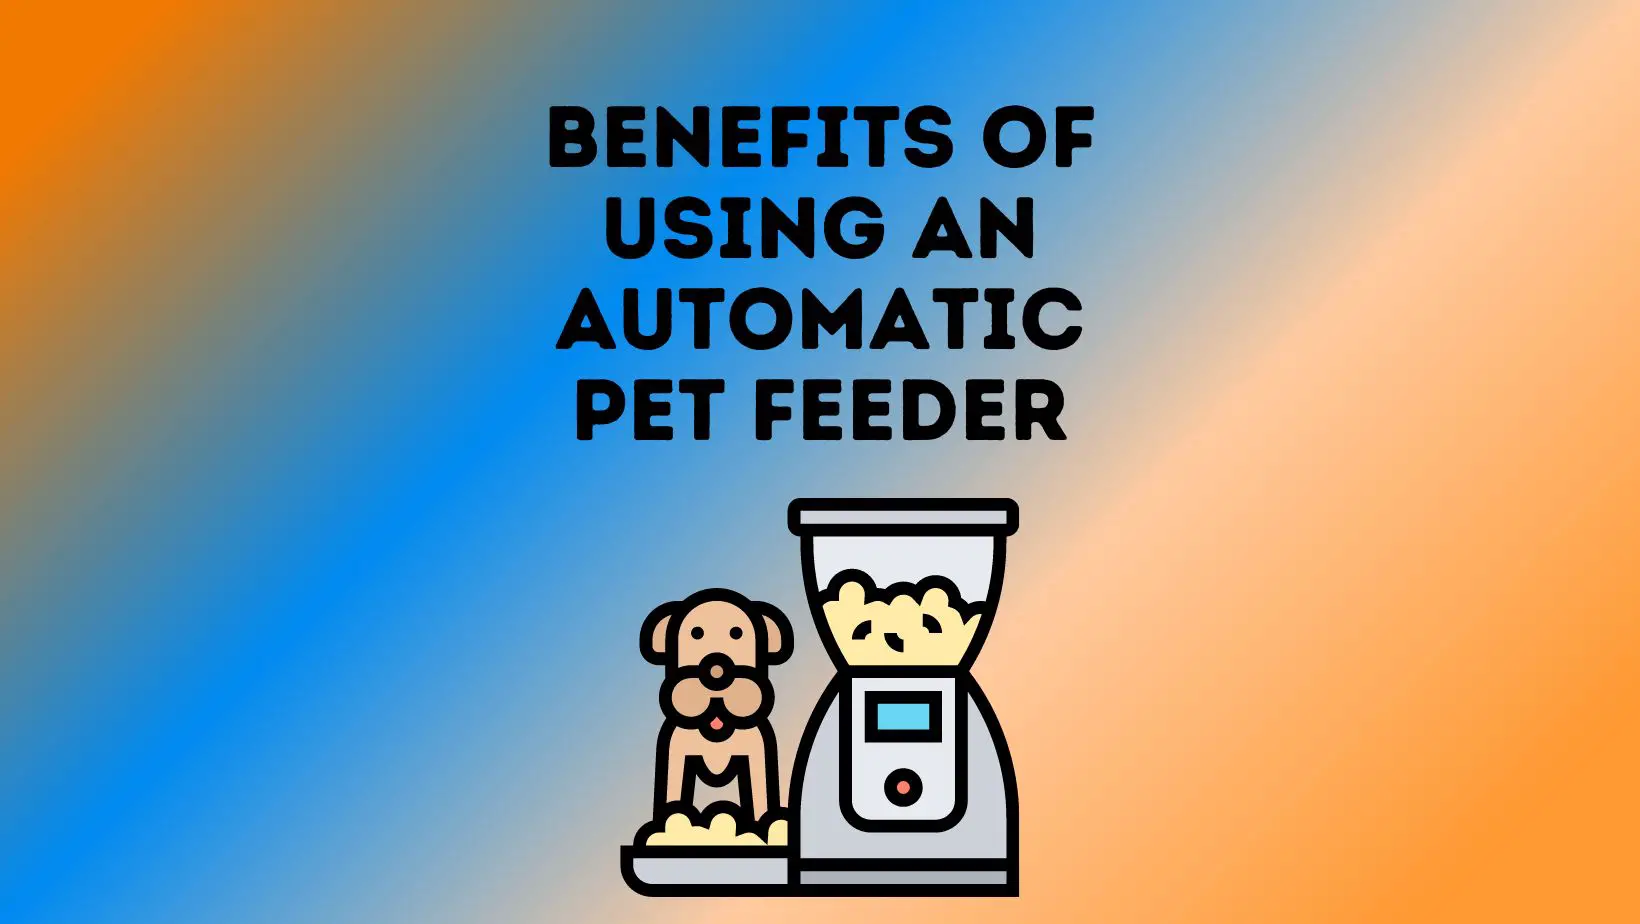 Benefits of Using an Automatic Pet Feeder